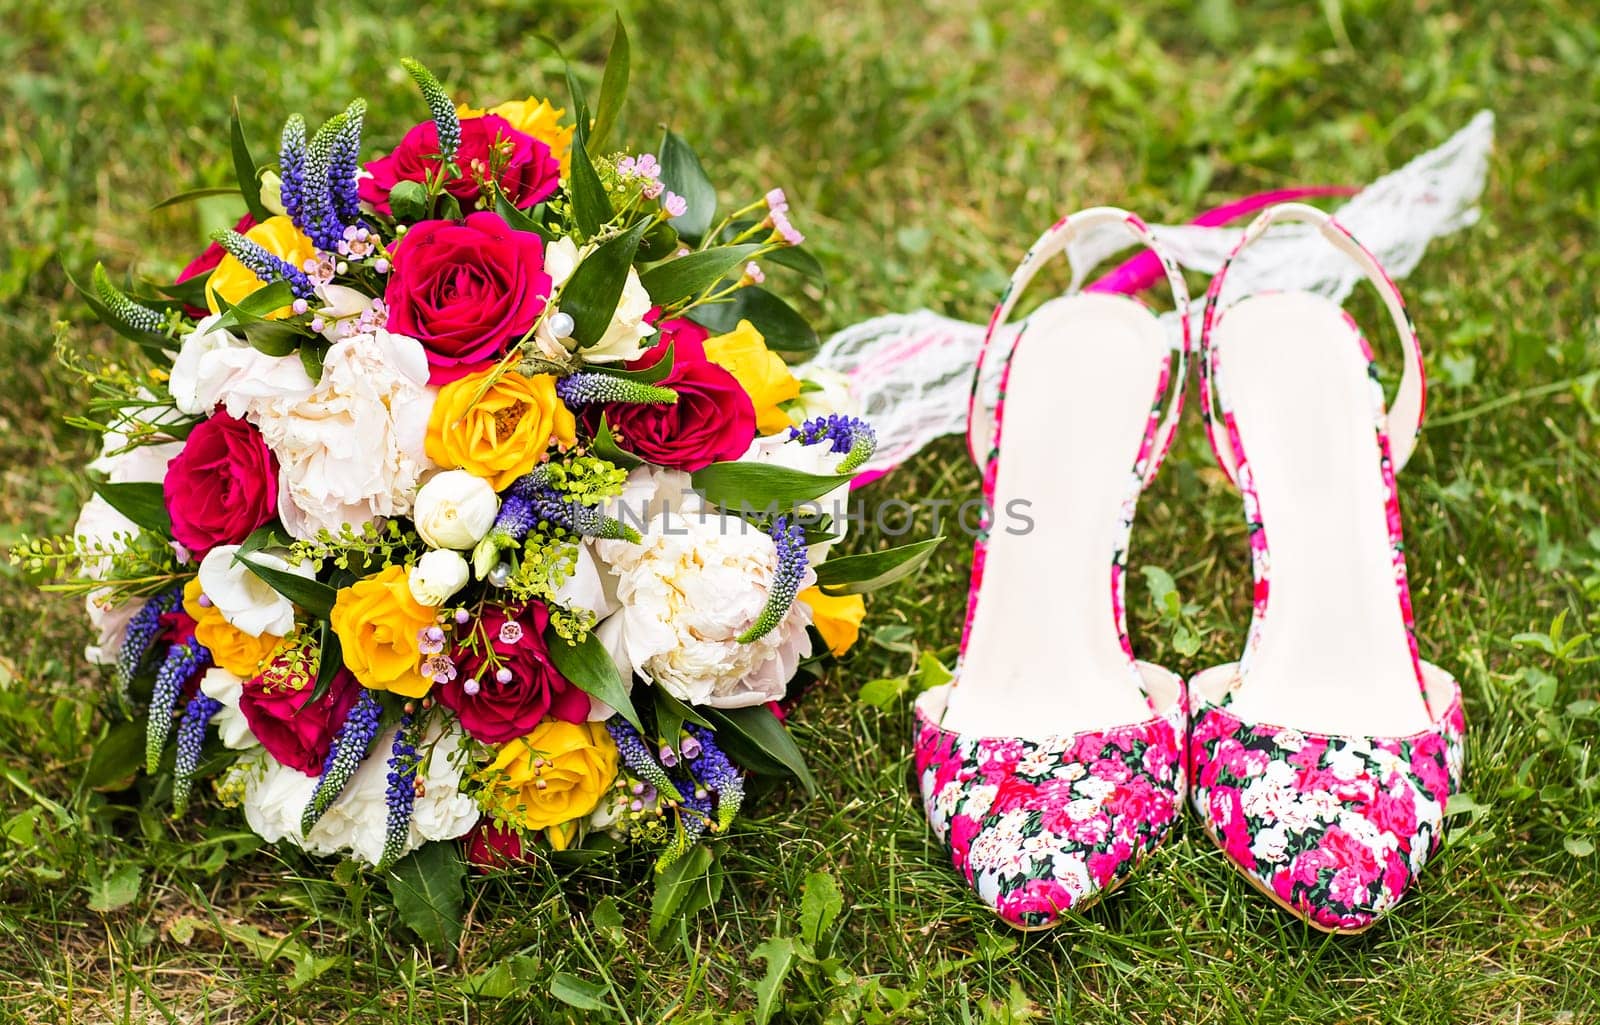 wedding bouquet and bridal shoes on the grass